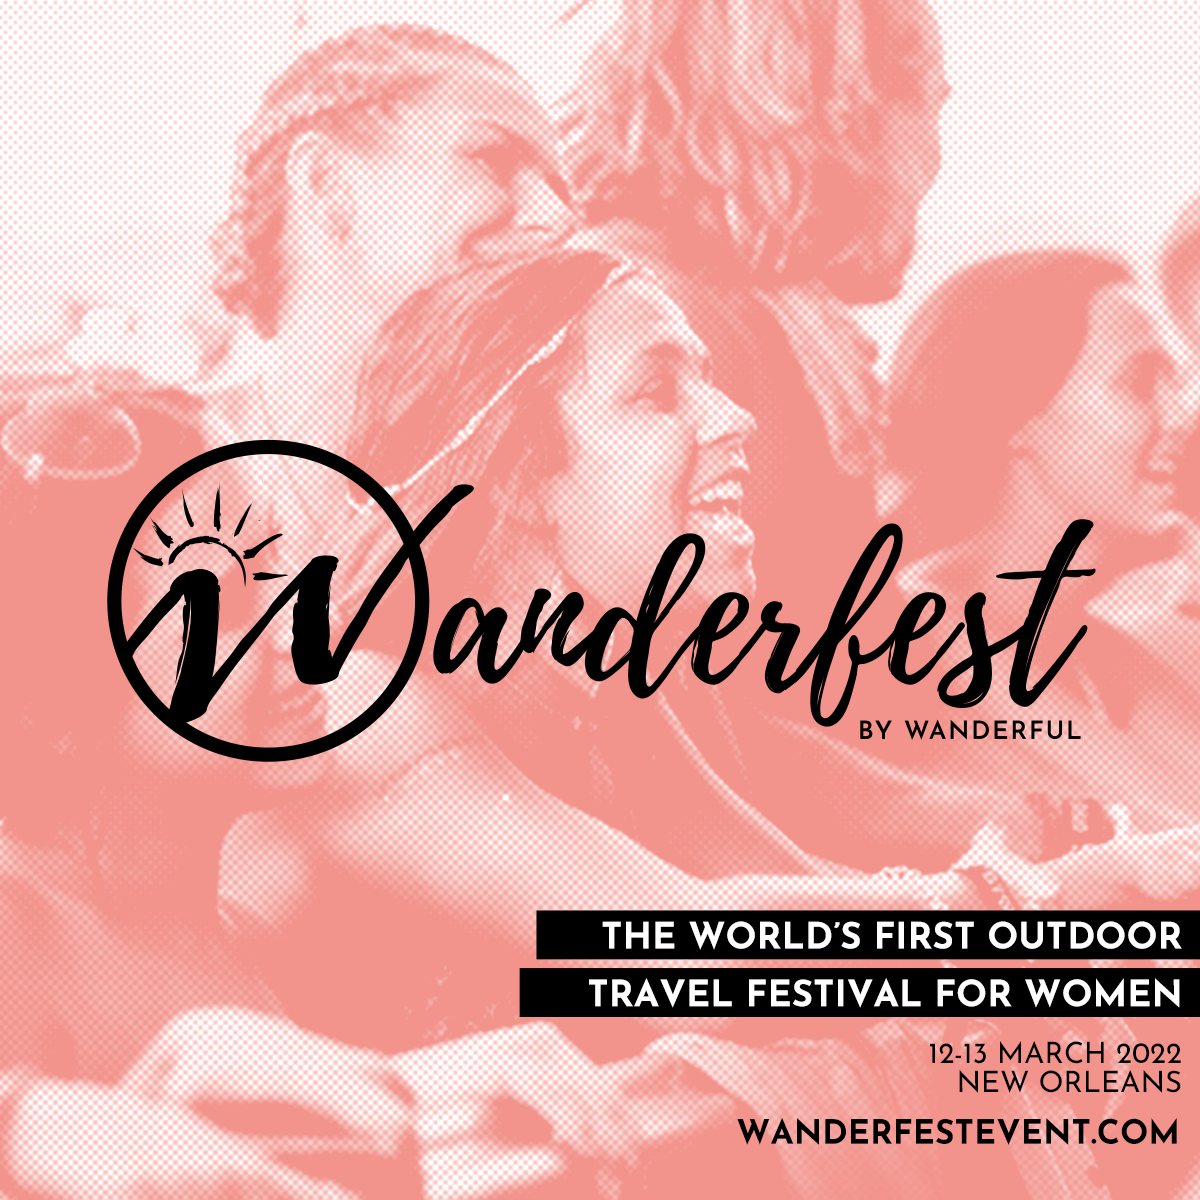 Promotional graphic featuring several happy women at a festival. The image text says: Wanderfest by Wanderful: The world's first outdoor travel festival for women. 12-13 March 2022 in New Orleans